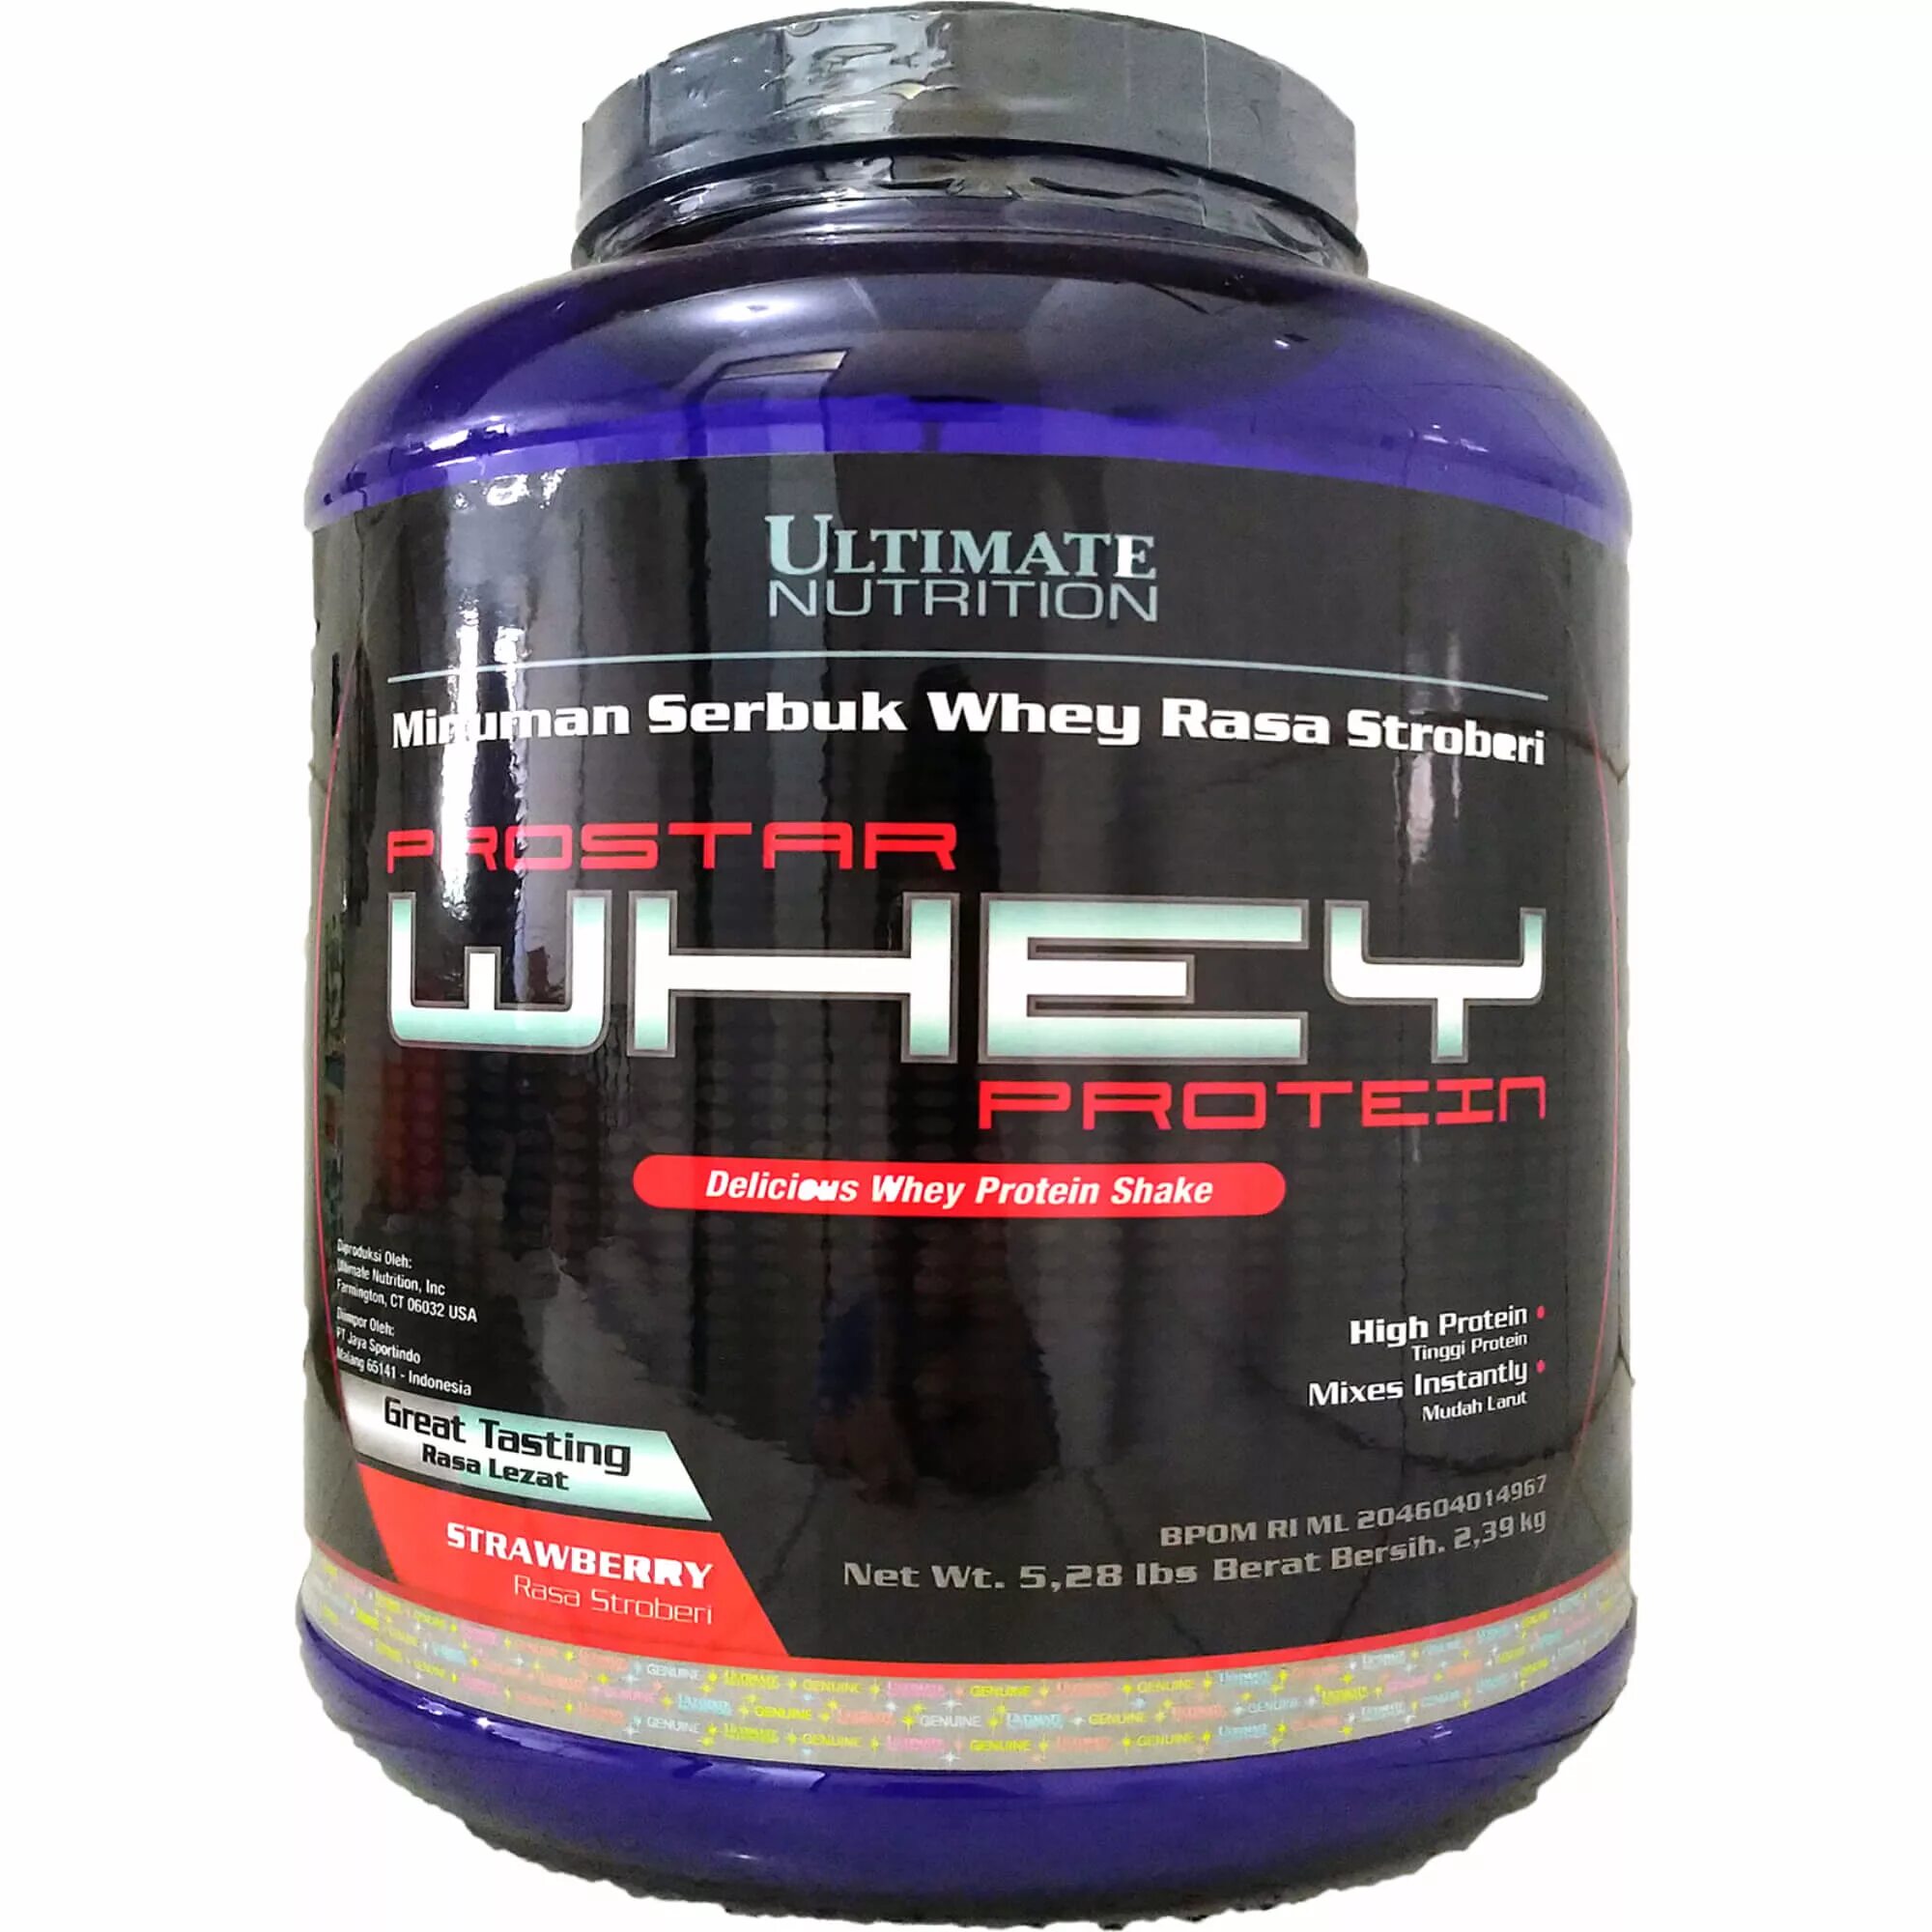 Ultimate Nutrition Prostar 100% Whey Protein. Ultimate Nutrition Prostar Whey Protein. Протеин Prostar Whey Ultimate Nutrition. Ultimate Prostar Whey 1.1 lbs.